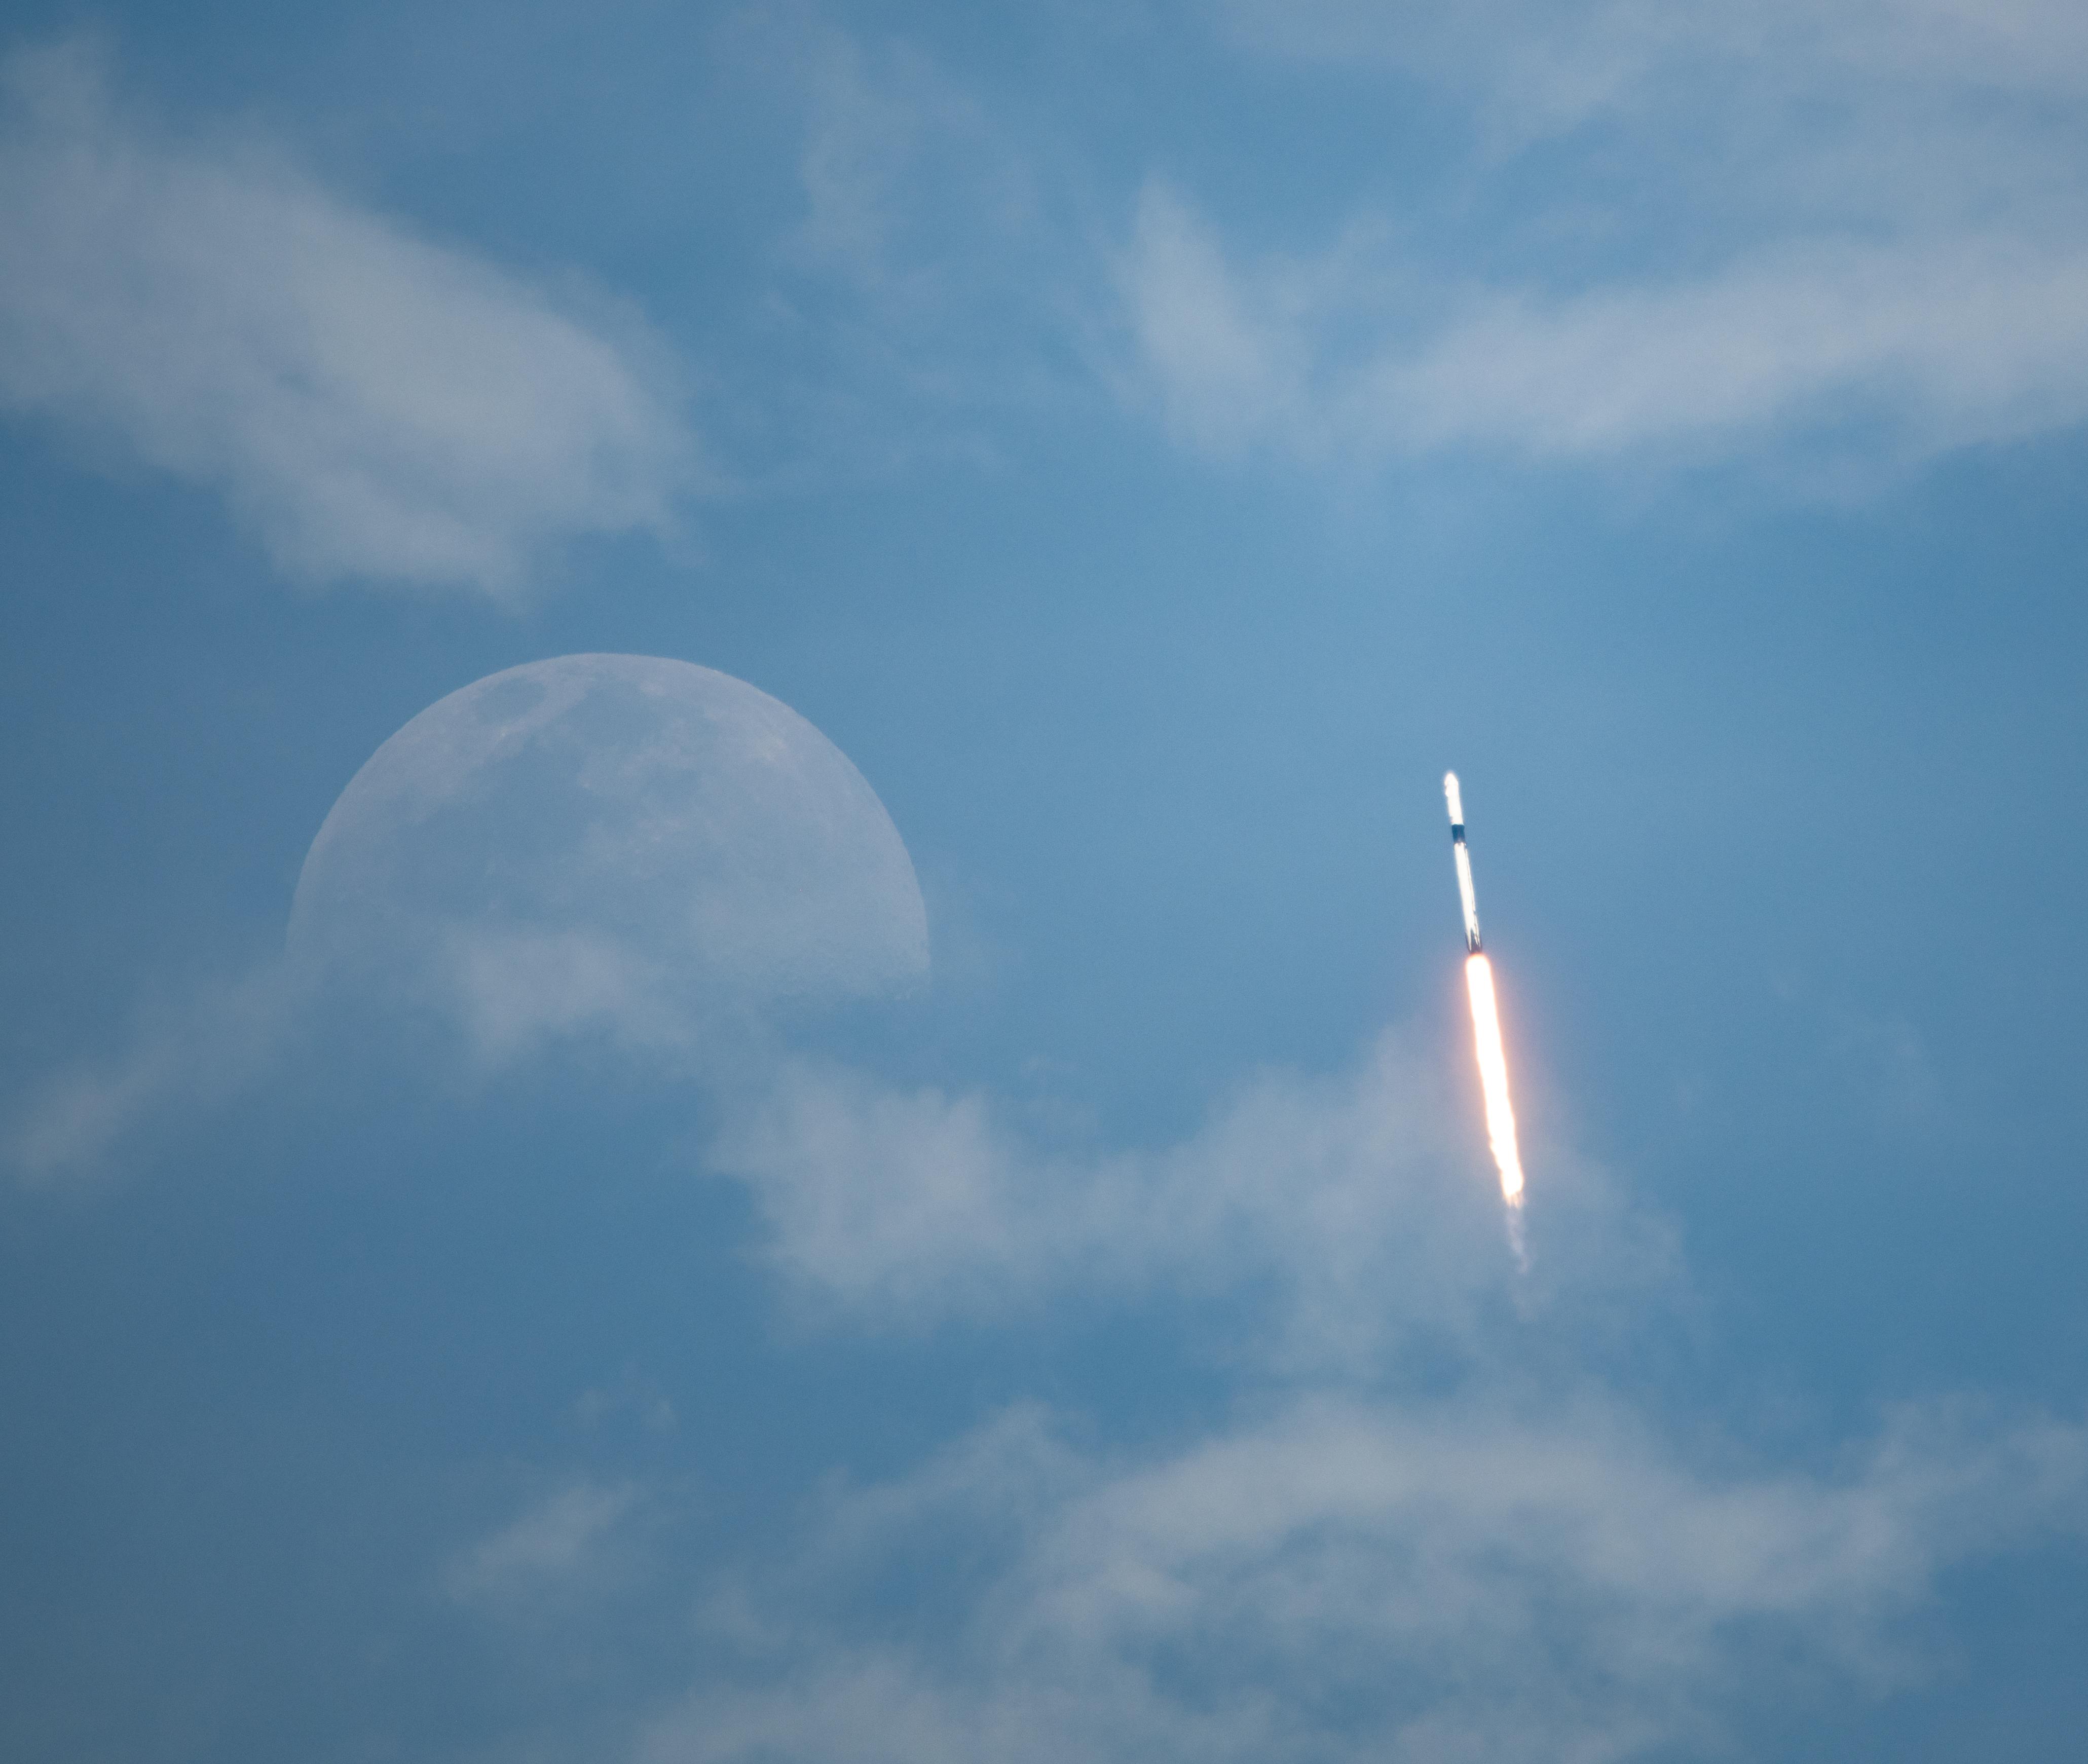 Next Stop! I Took This Photo Of The Crew Demo 2 Launch And Was Lucky Enough To Get The Moon In The Photo [OC]